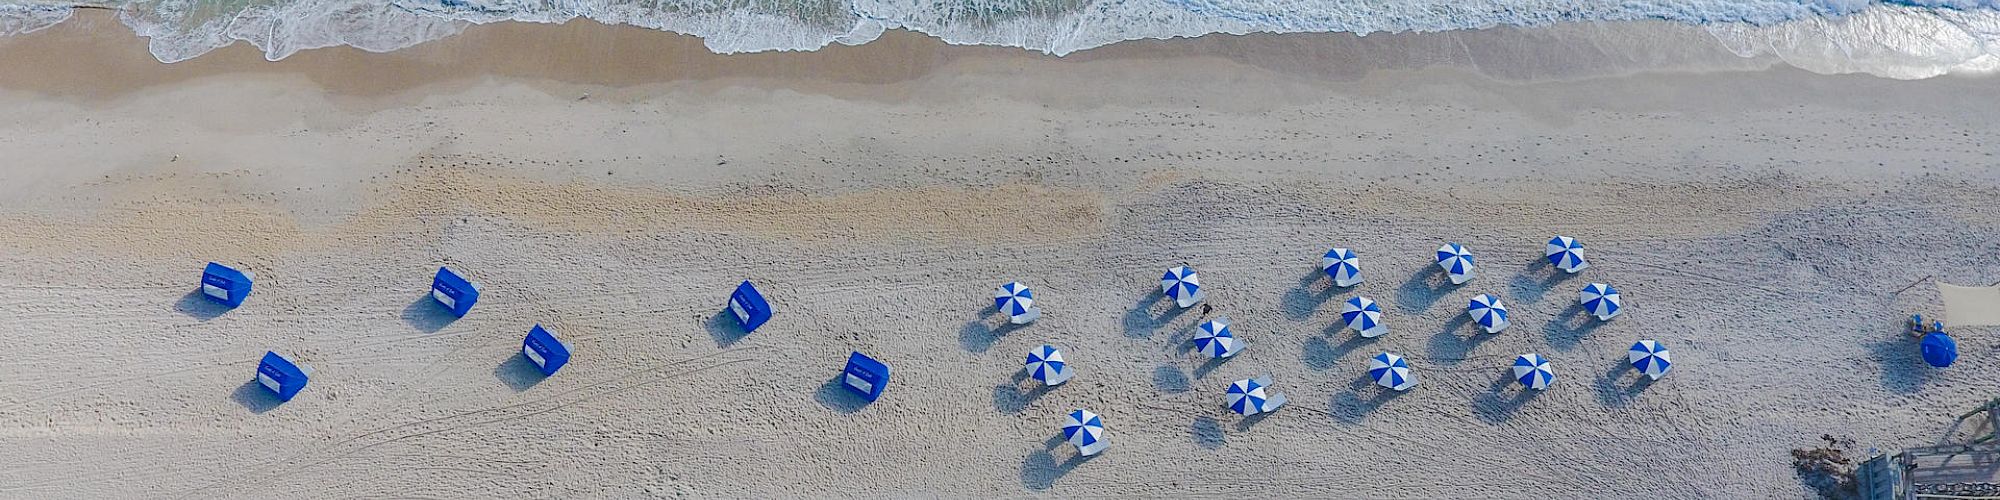 An aerial view of a beach with lined-up blue and white umbrellas, beach chairs, and the ocean's waves touching the shore in the background.